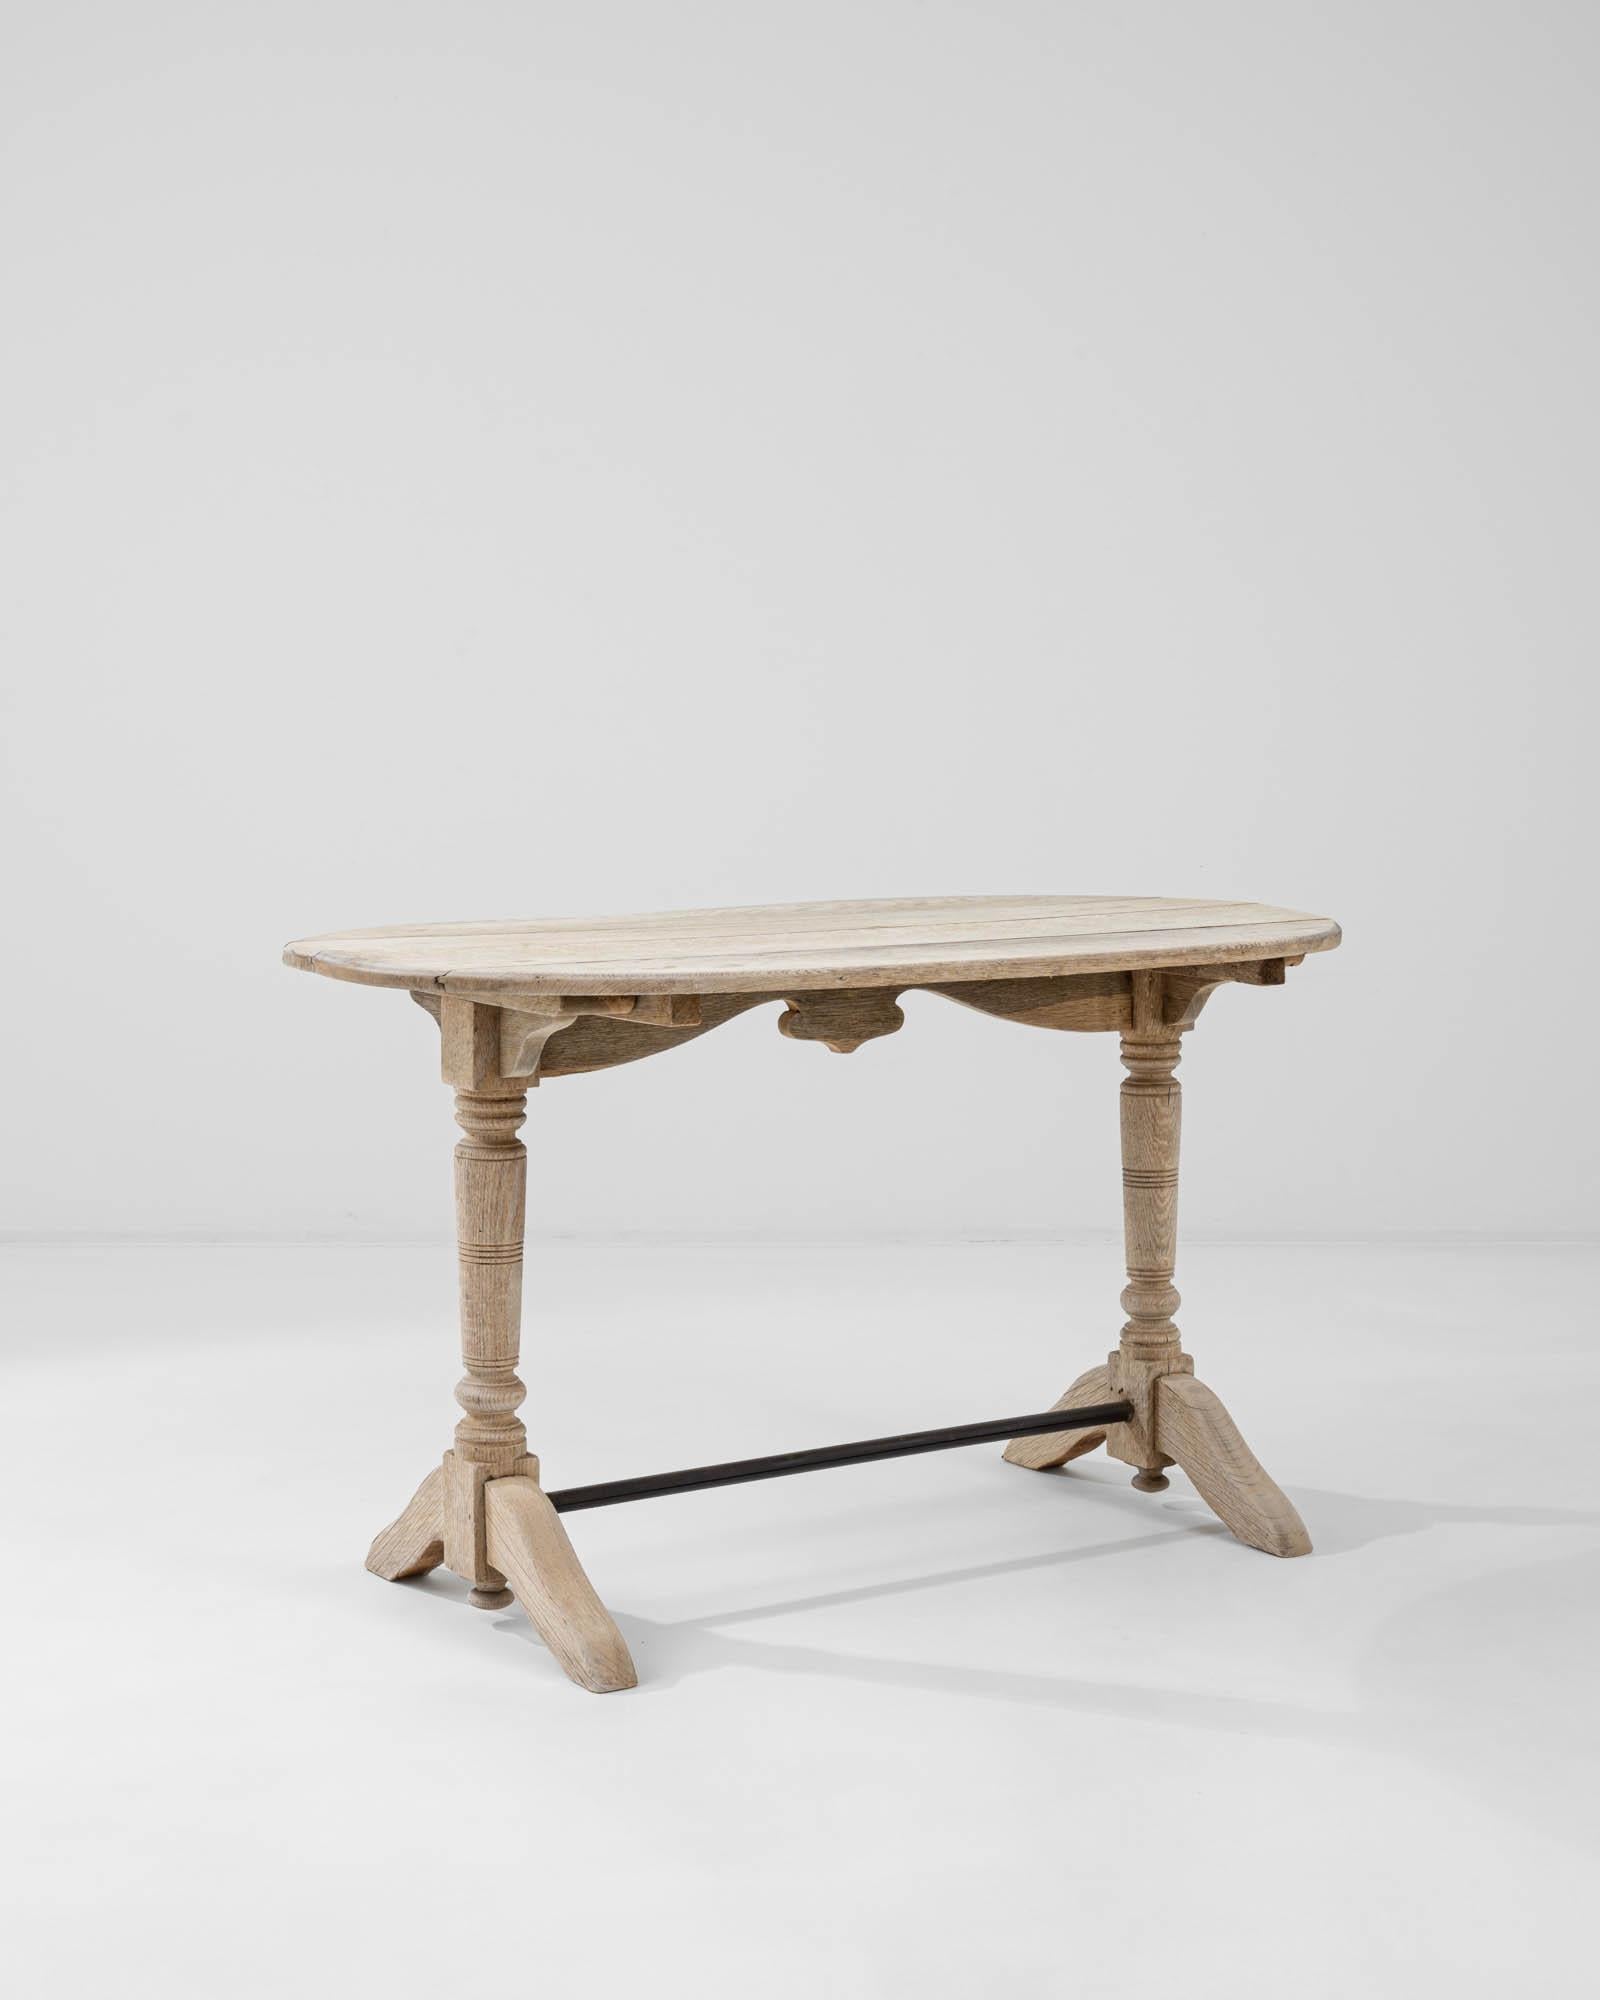 A wooden table from France, circa 1900. This small trestle table is composed of two legs with arching diagonal feet, braced by a metal rod to reinforce the time tested surface. The compact form is adapted to the necessities of bustling cafés and